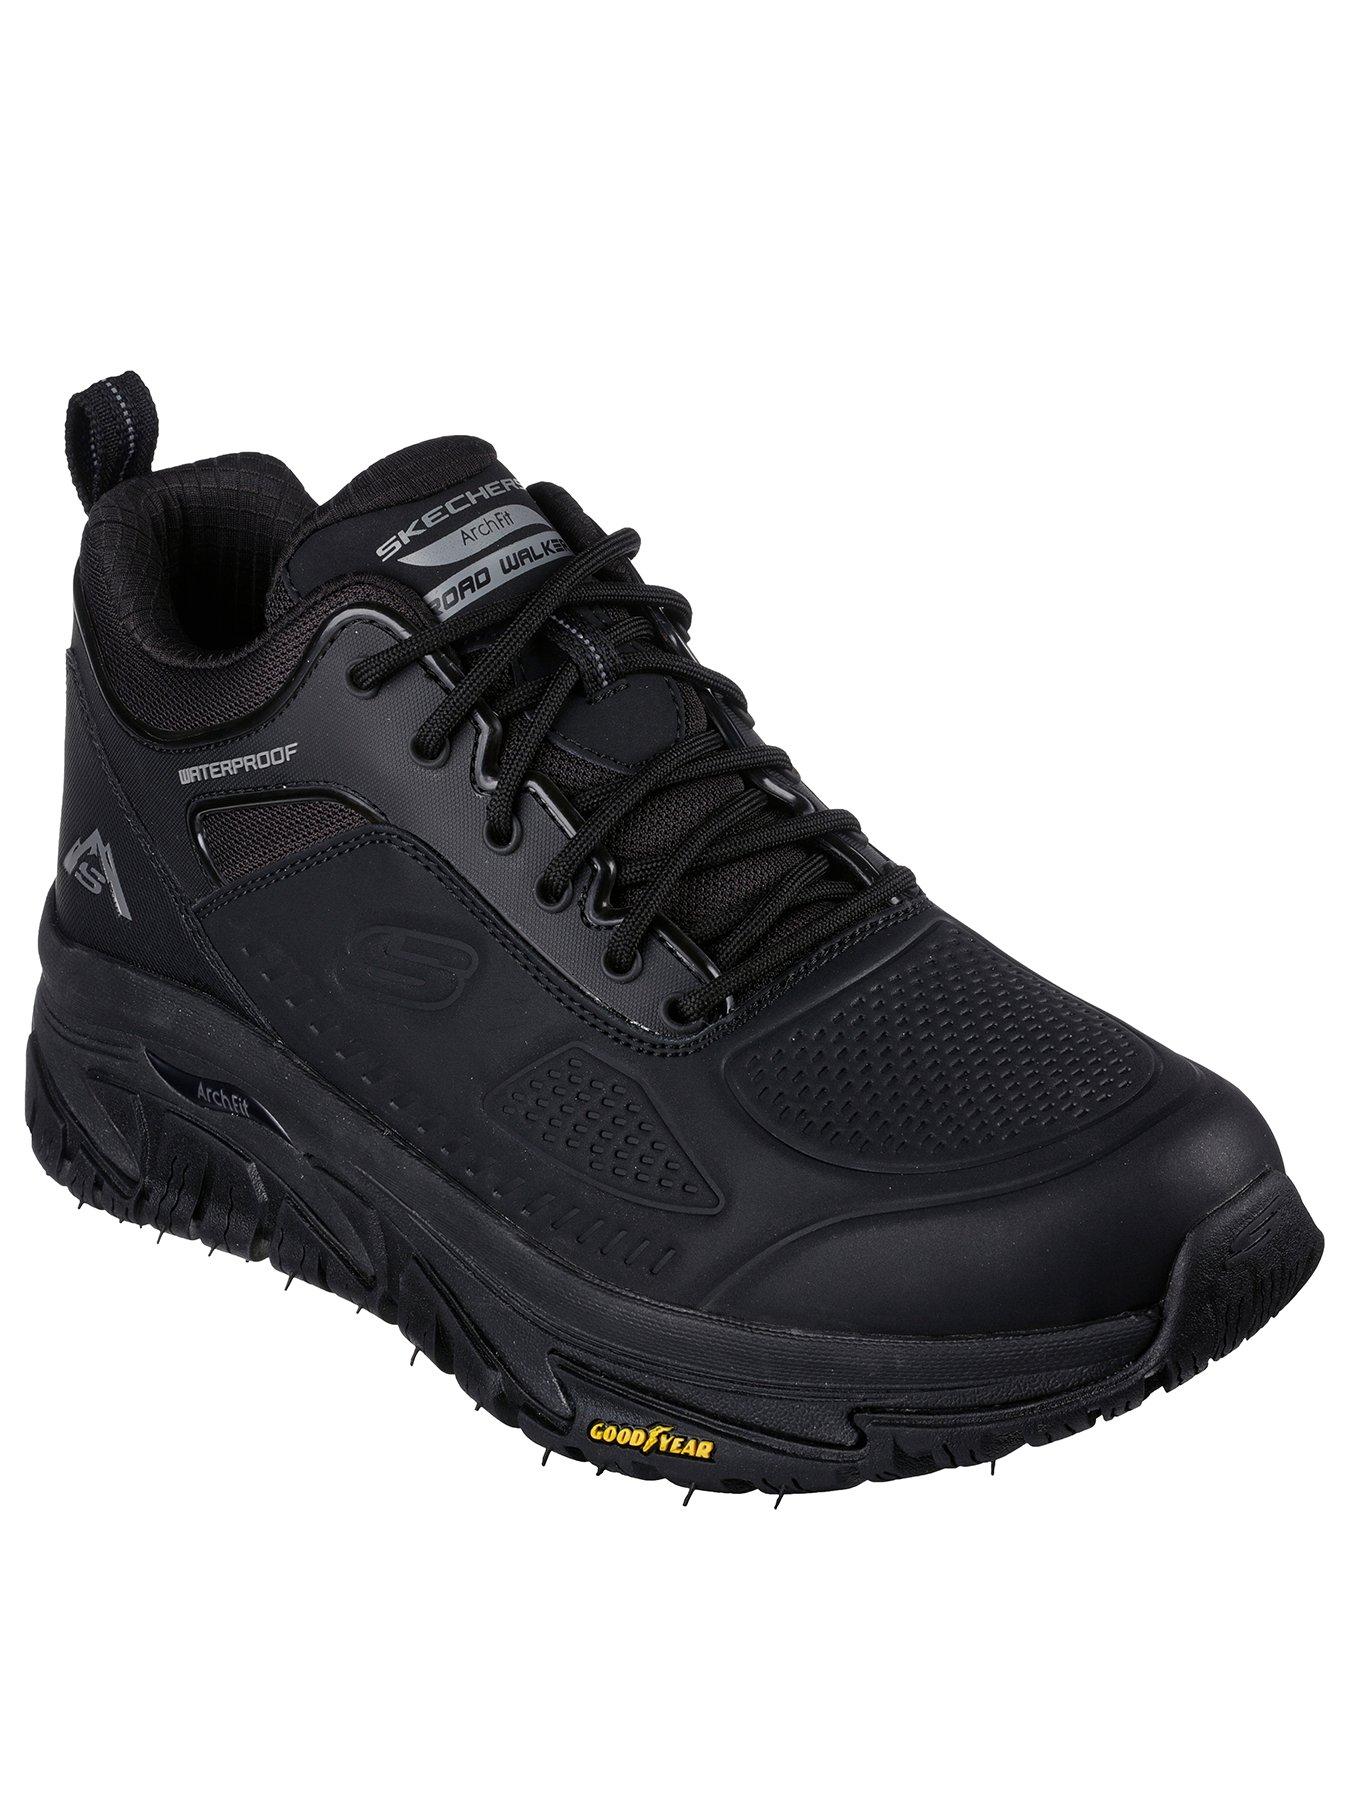 Skechers Outdoor Arch-Fit Goodyear Rubber Waterproof Mid Boots - Black ...